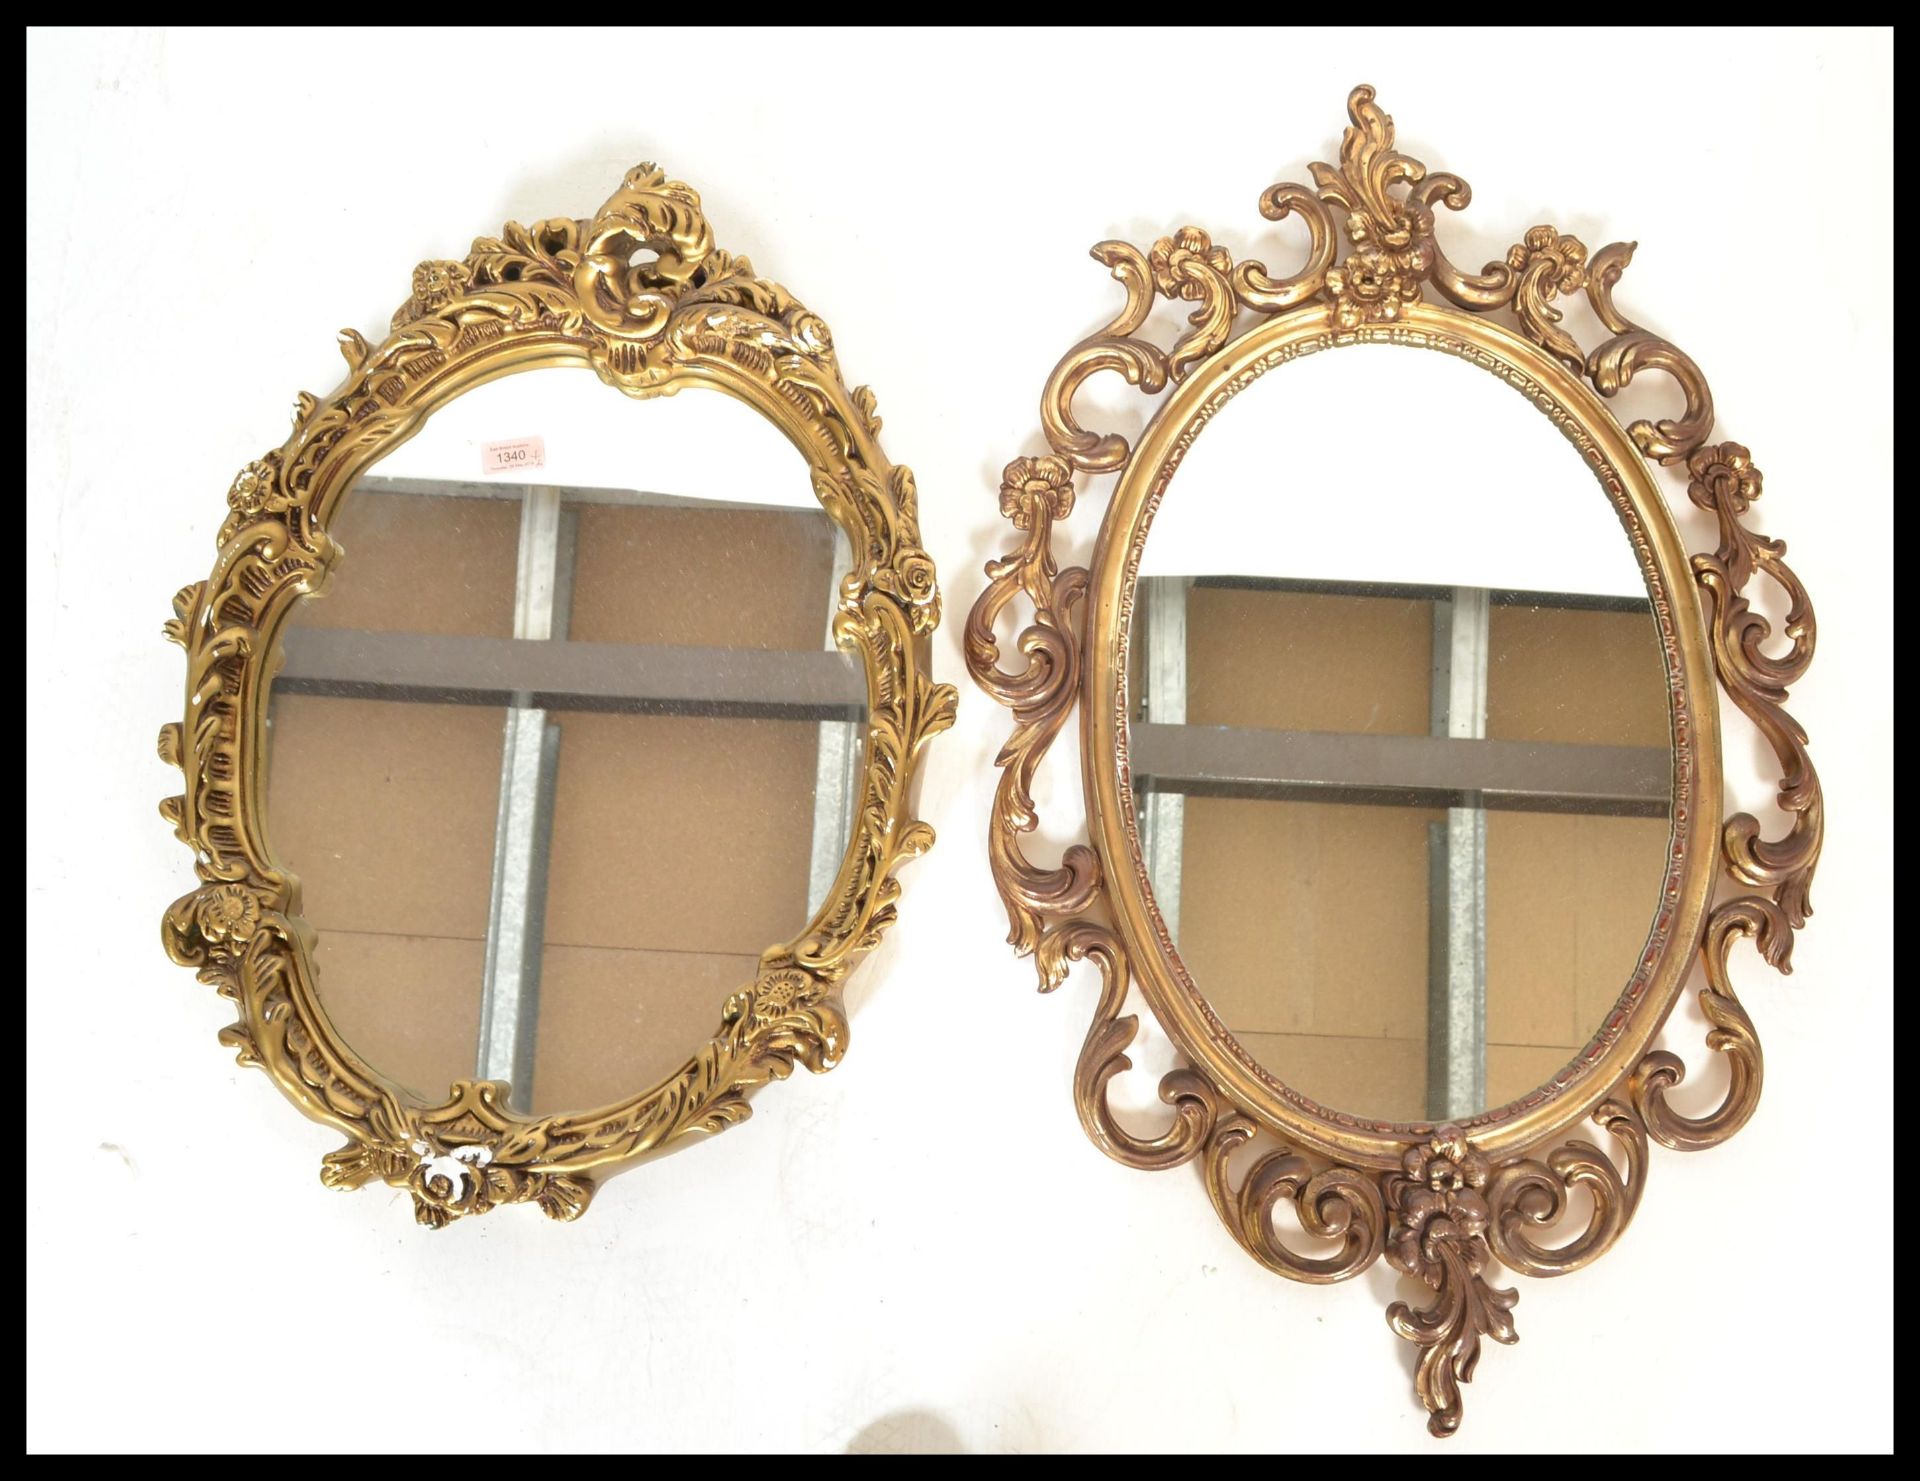 Two antique style 20th Century ornate glass wall mirrors having faux food gilt ormolu scrolled